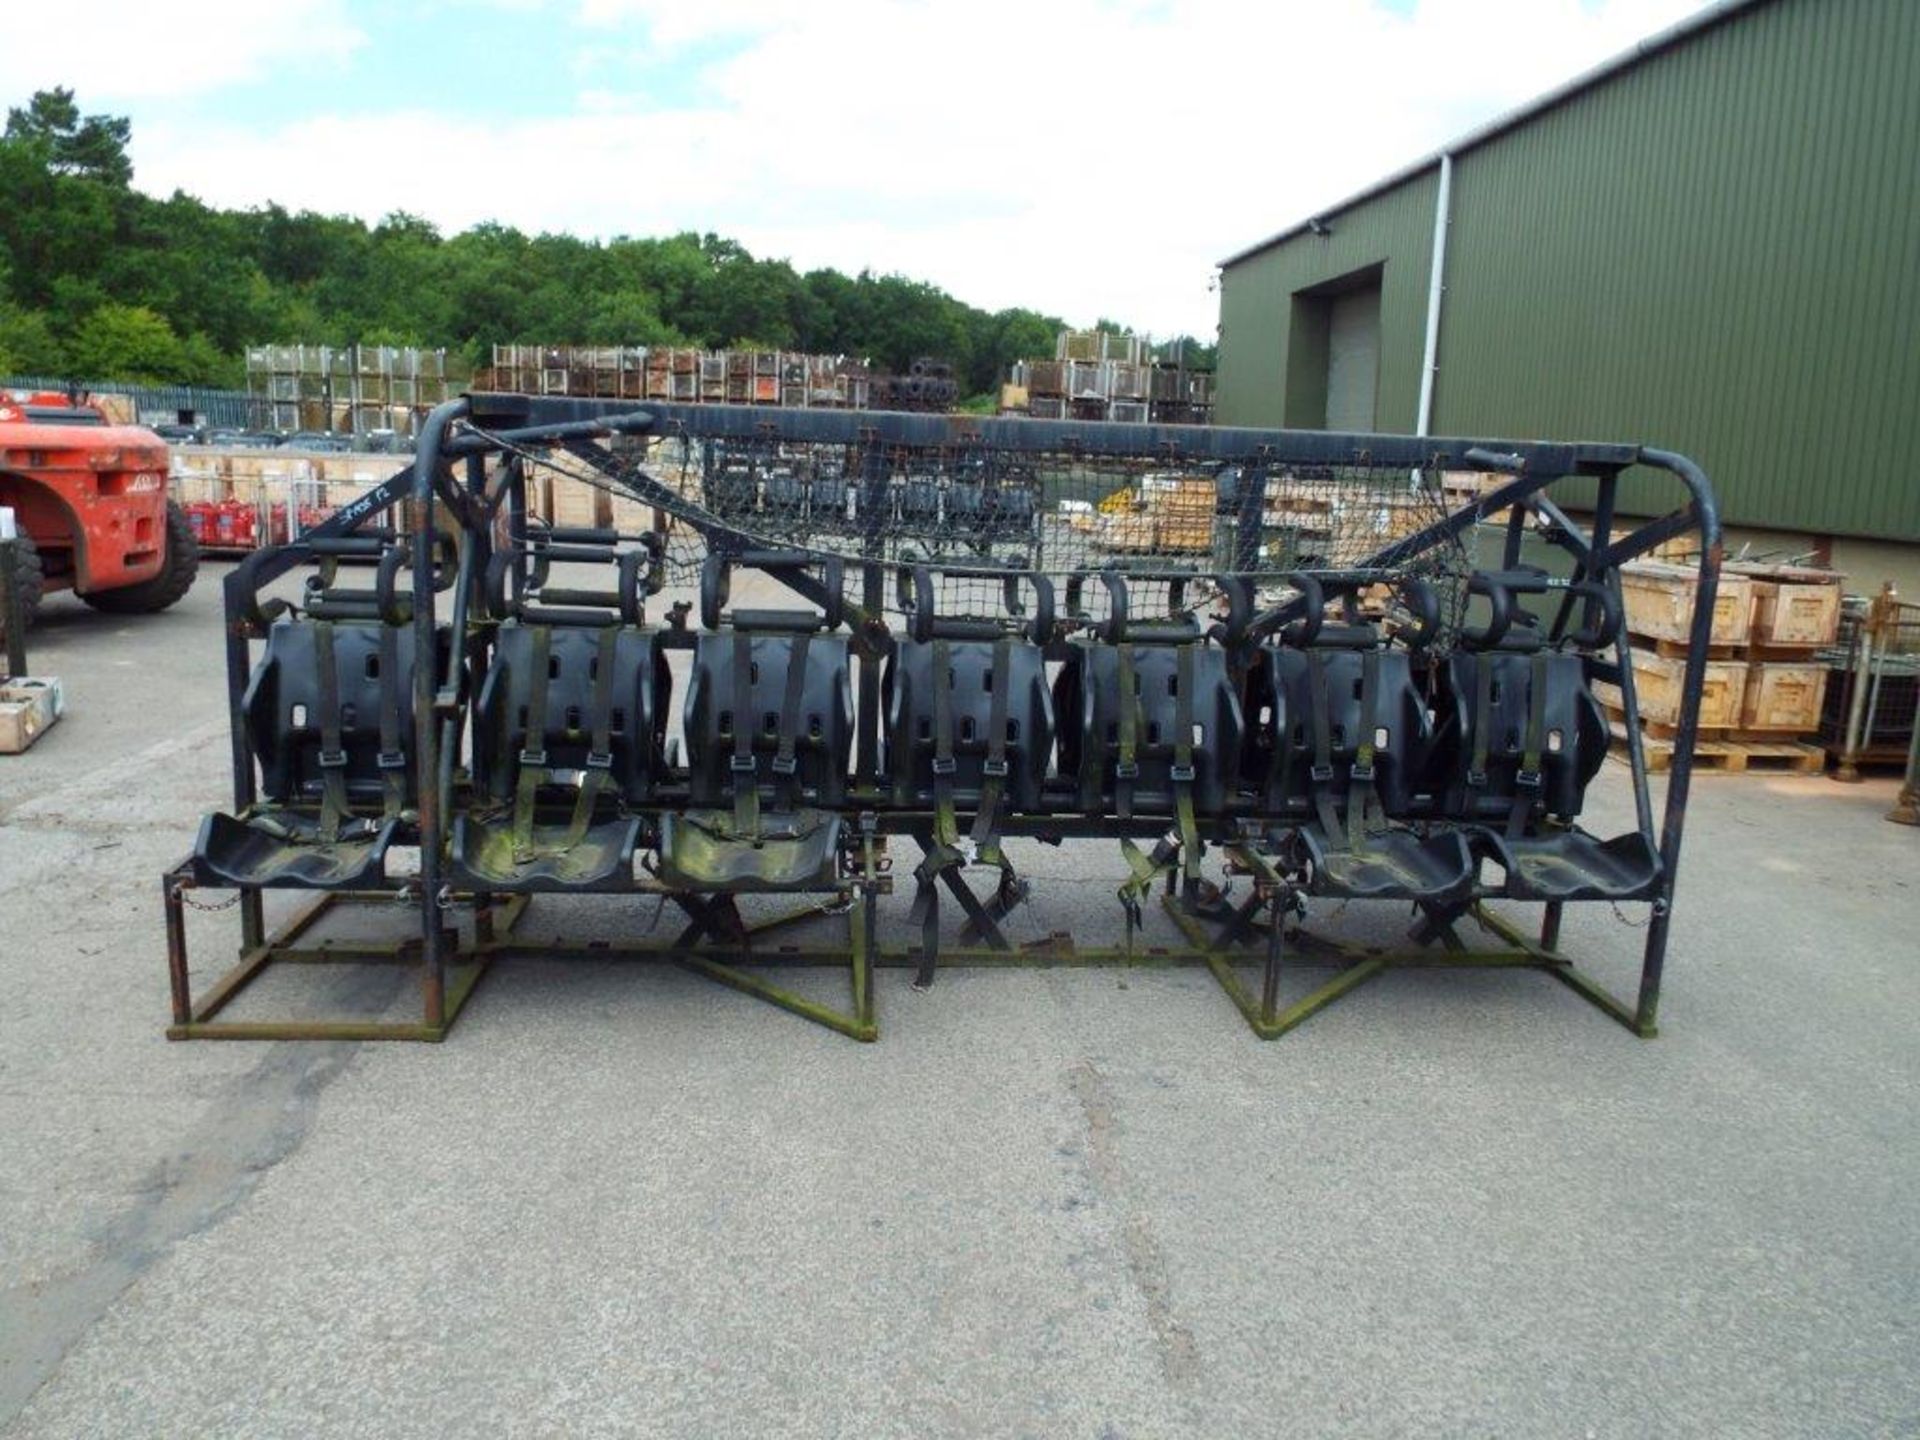 14 Man Security Seat suitable for Leyland Dafs, Bedfords etc - Image 3 of 8